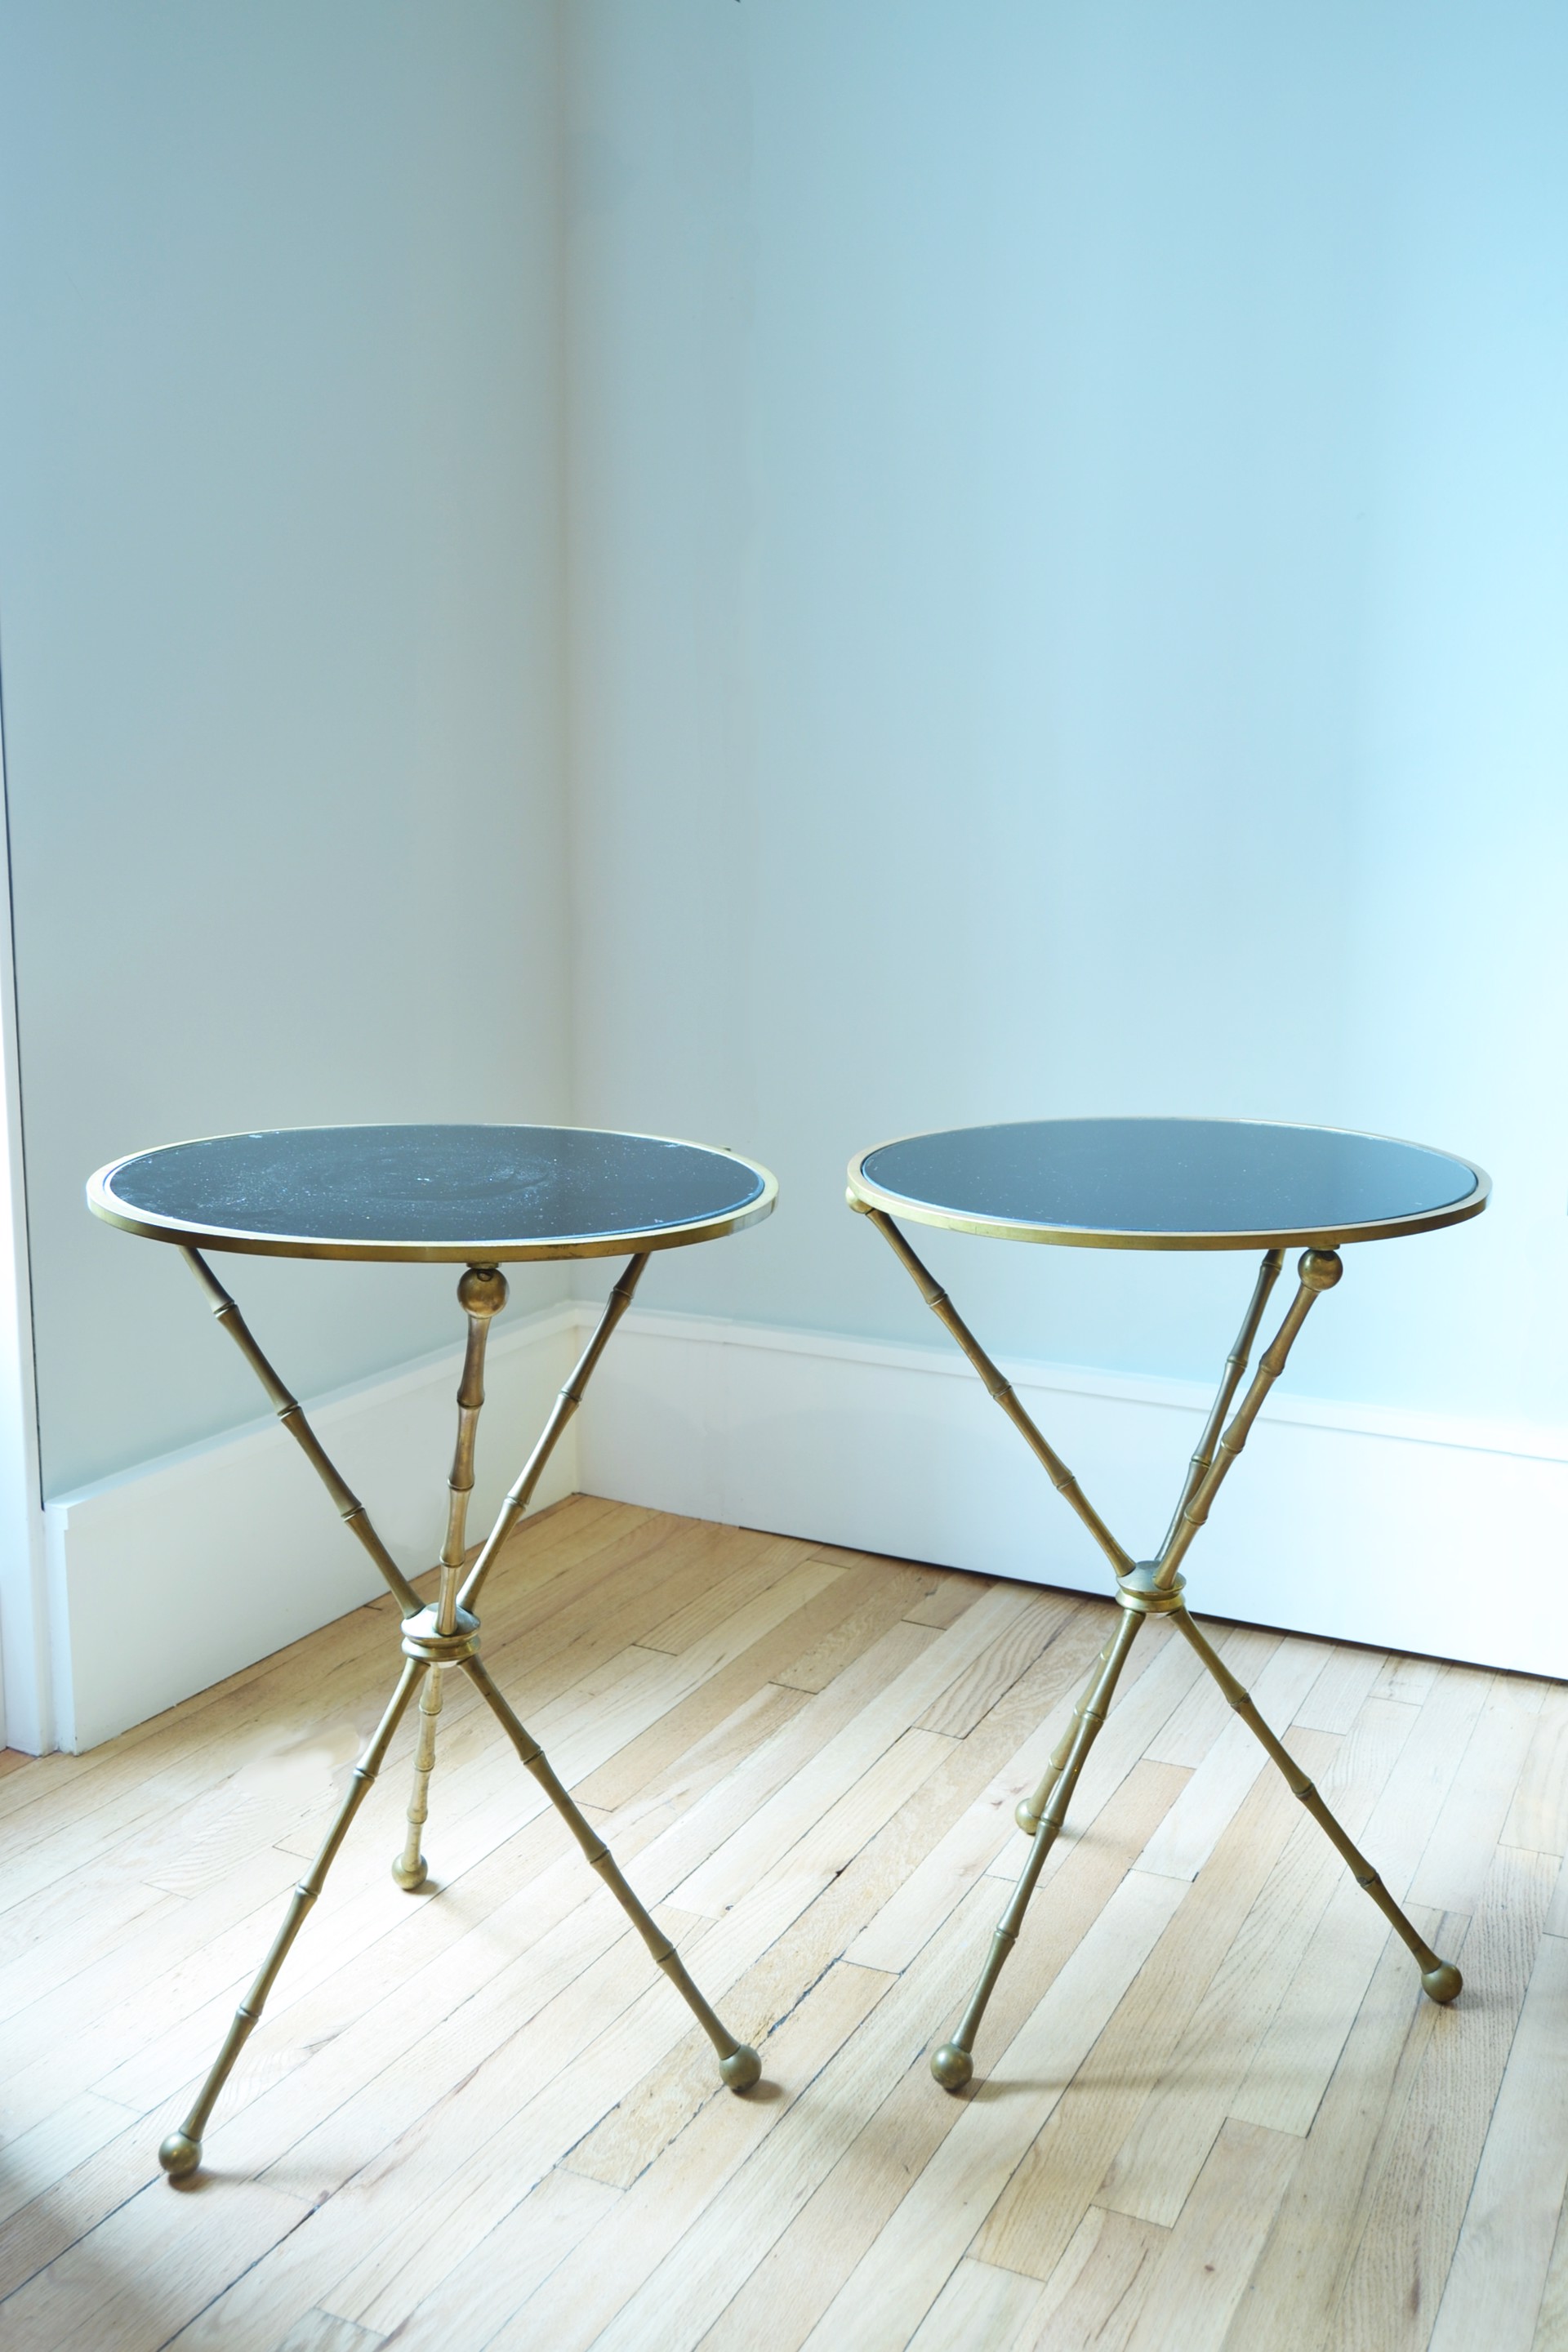 PAIR OF NEOCLASSICAL STYLE METAL FAUX BAMBOO CIRCULAR SIDE TABLES